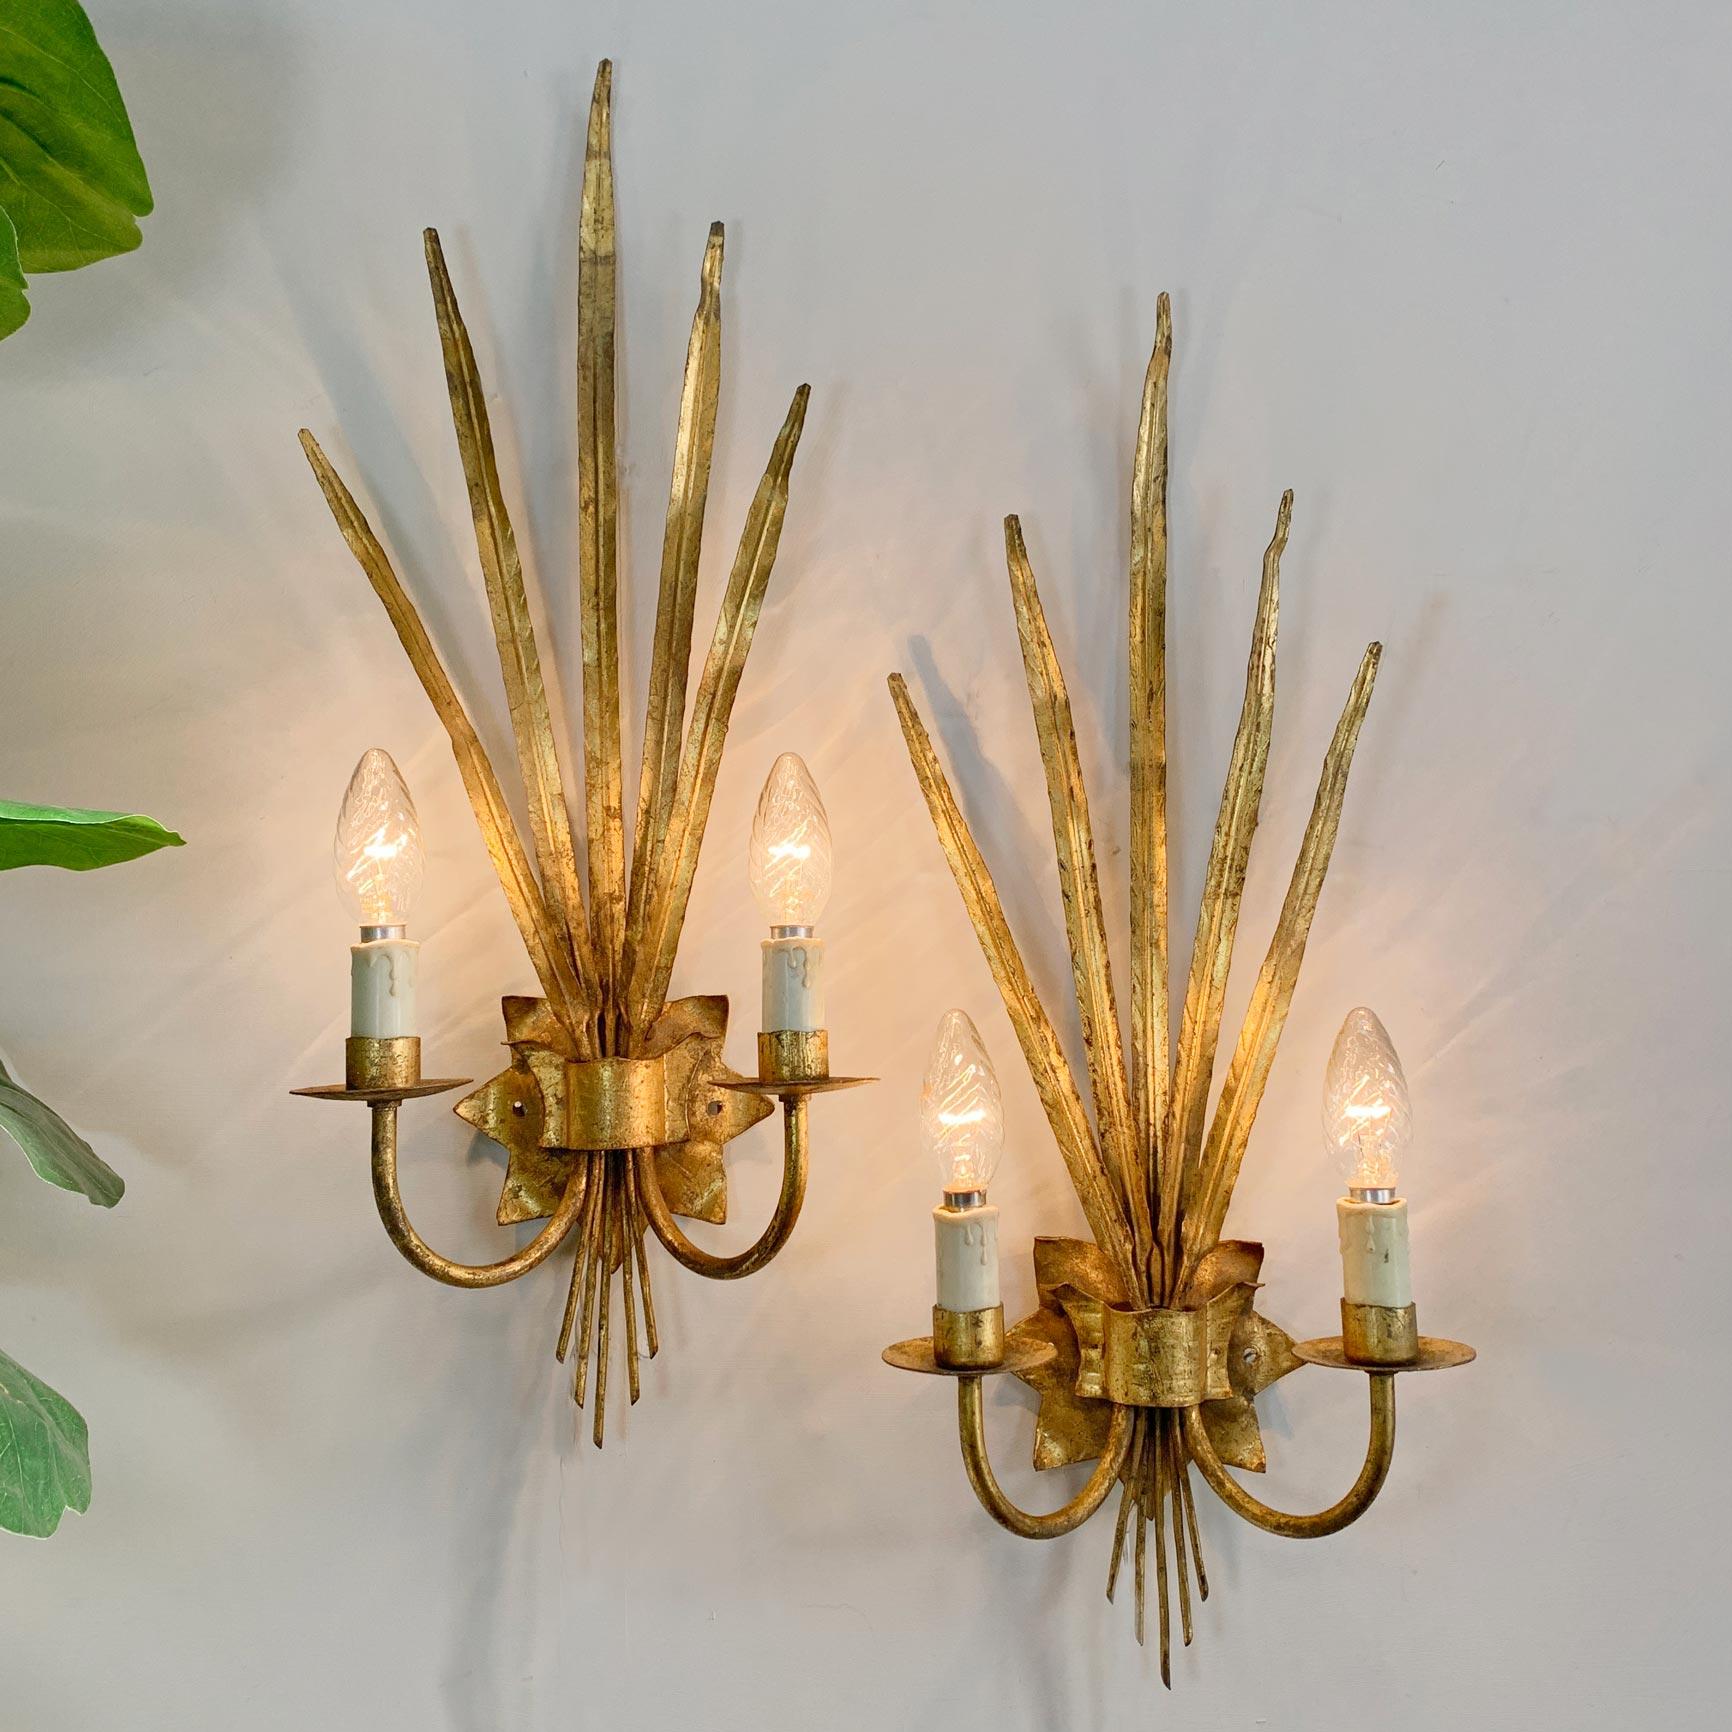 Large ‘Ferro Art’ reed leaf wall lights
Spain 1950's 
 
Fabulous pair of very large gilt wall lights in the design of elegant fine leaves
These lights are attributed to ‘Ferro Art’ 
61cm height, 23cm width, 14cm depth 
 
Each light takes 2 small